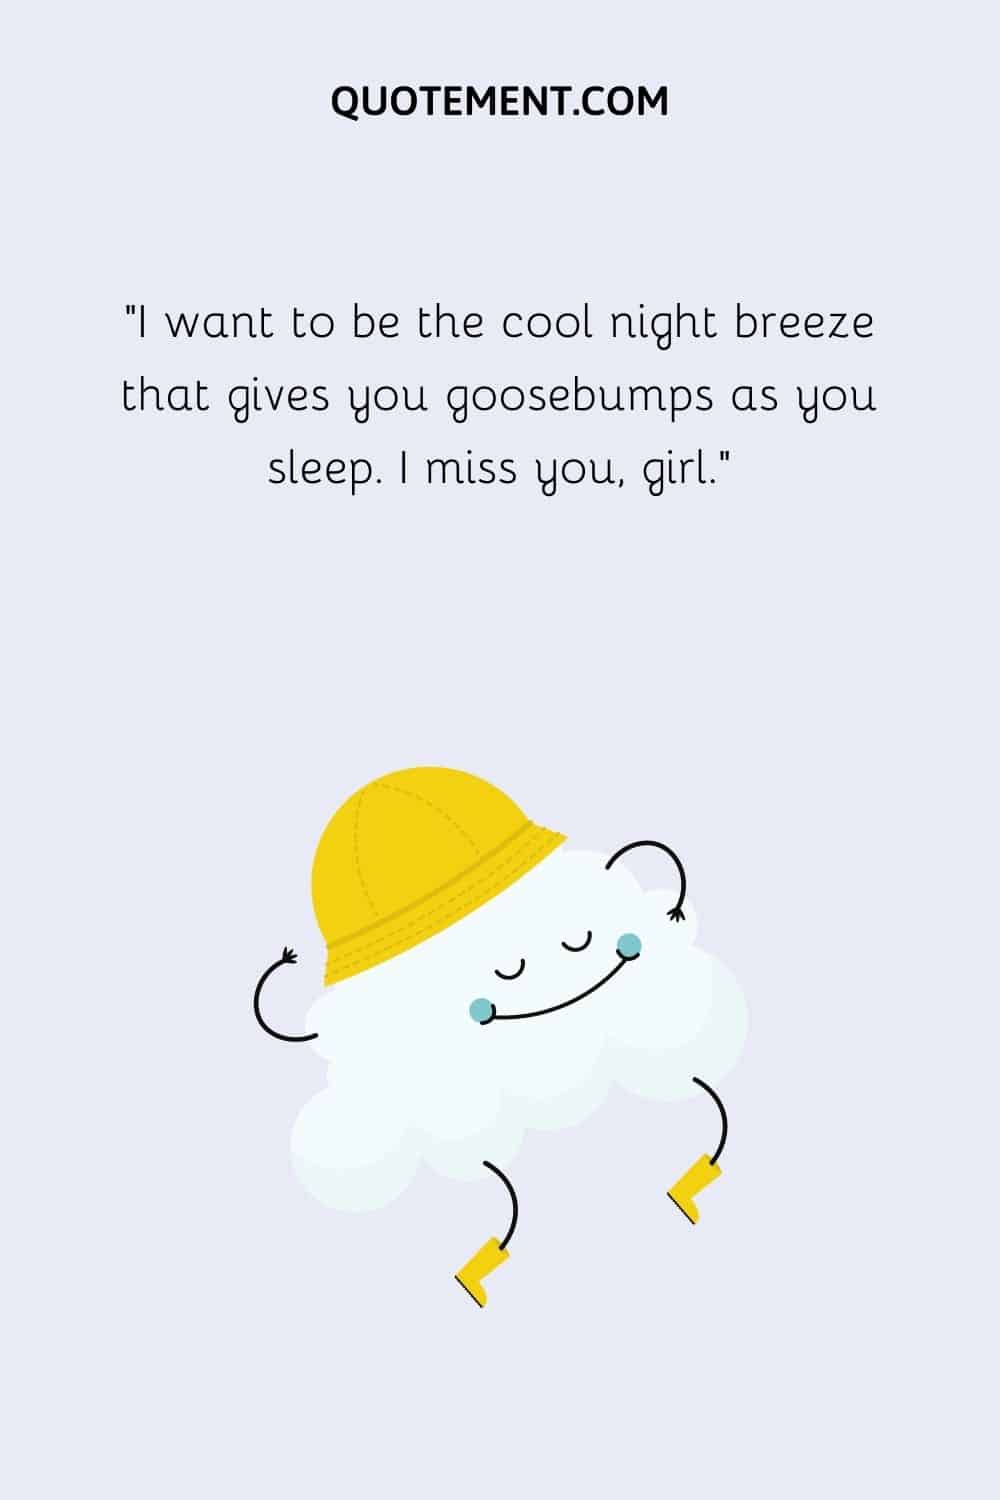 I want to be the cool night breeze that gives you goosebumps as you sleep